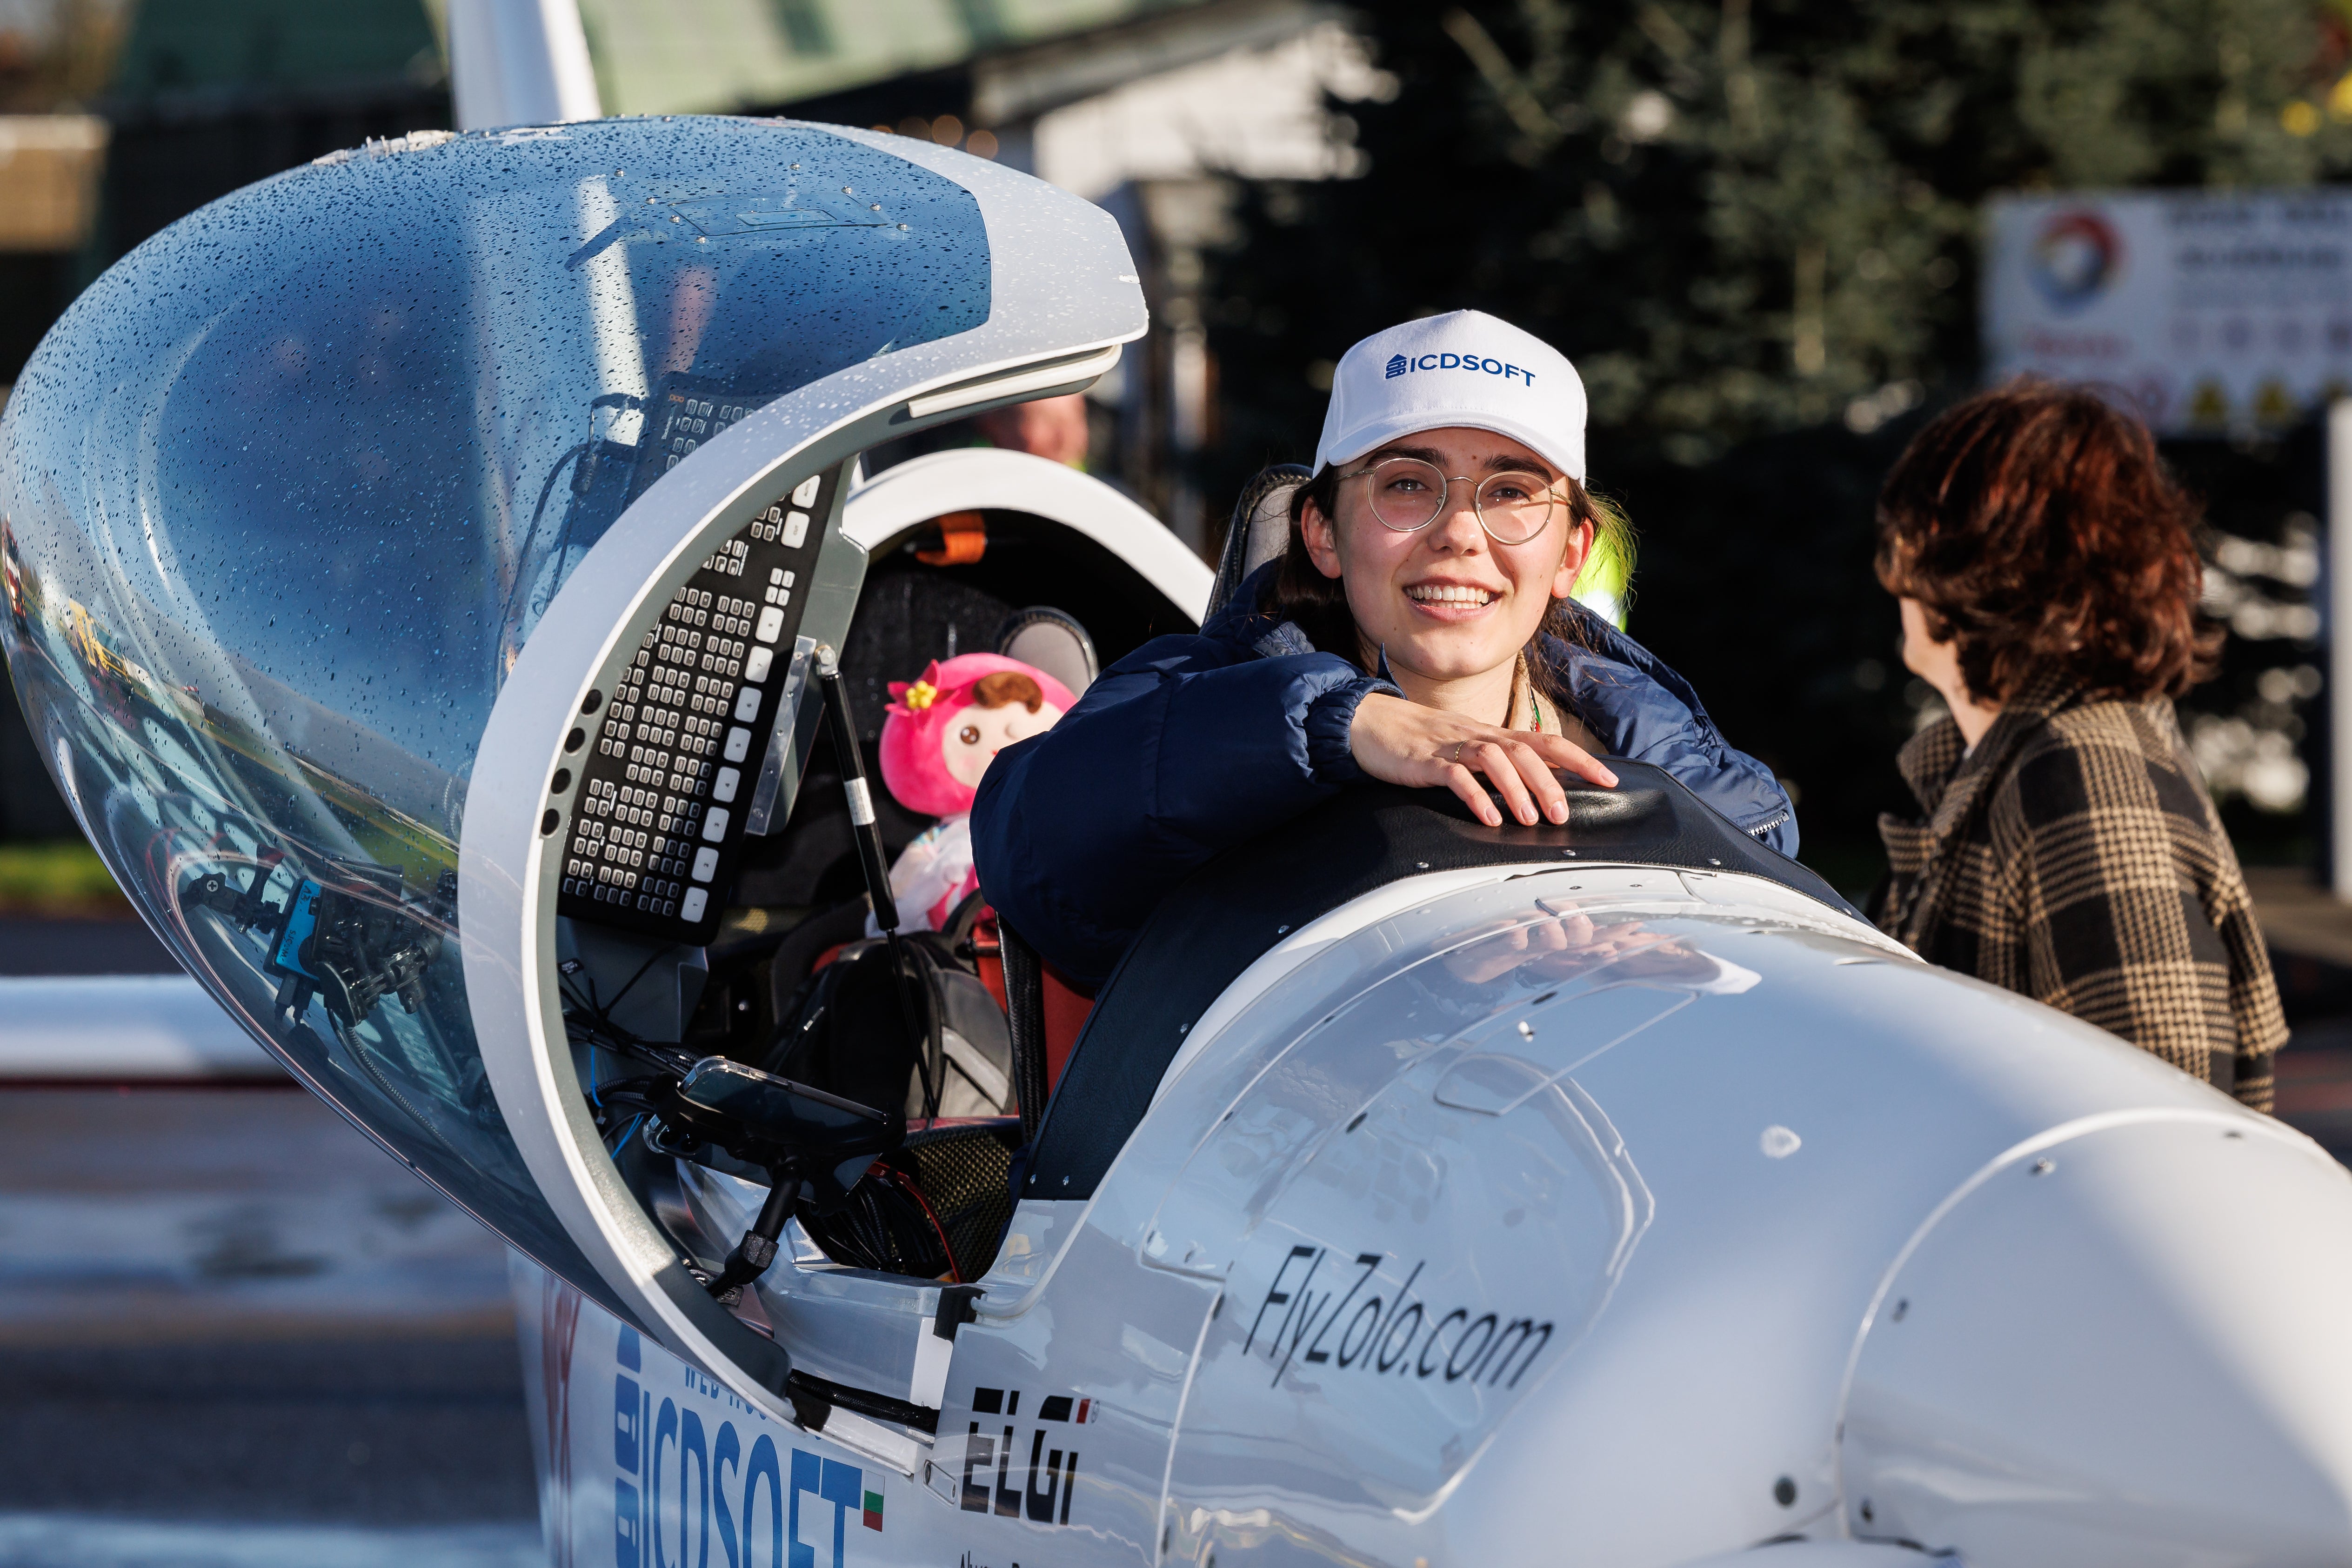 19 year-old Zara Rutherford exits her two-seater airplane after completing her round-the-world trip